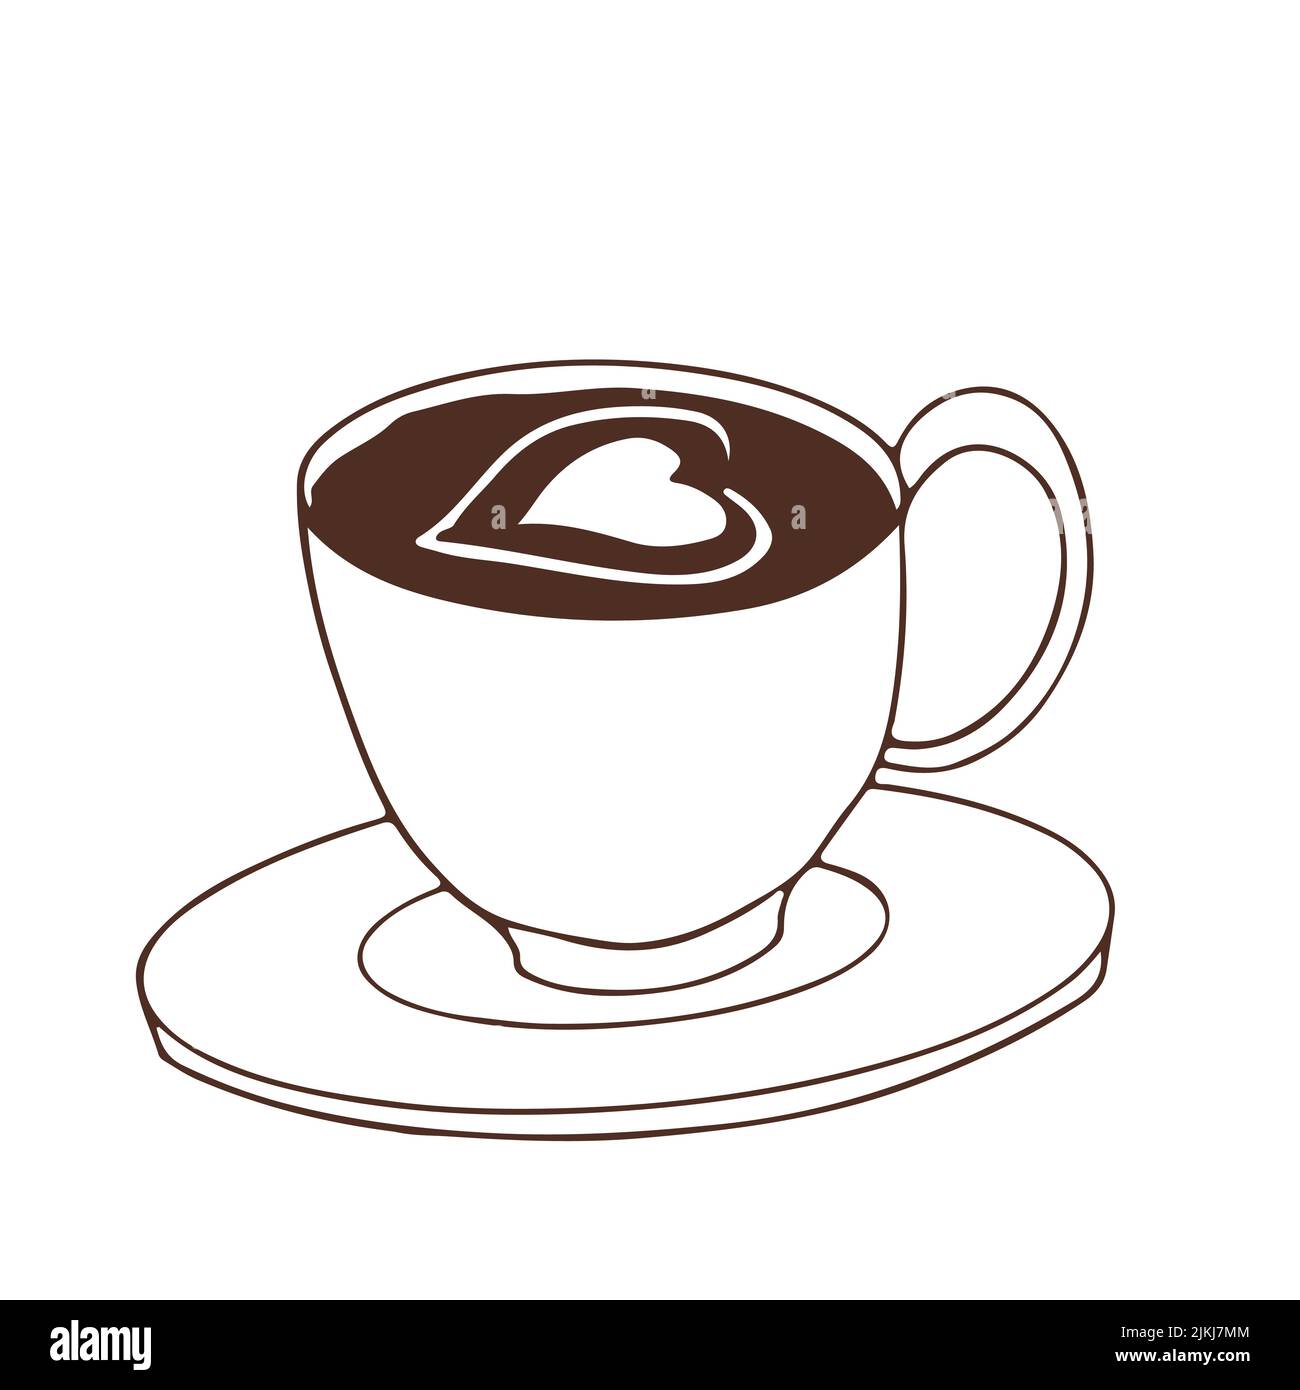 https://c8.alamy.com/comp/2JKJ7MM/coffee-cup-with-heart-decoration-hot-beverage-in-doodle-style-isolated-on-white-background-funny-icon-design-element-vector-illustration-2JKJ7MM.jpg